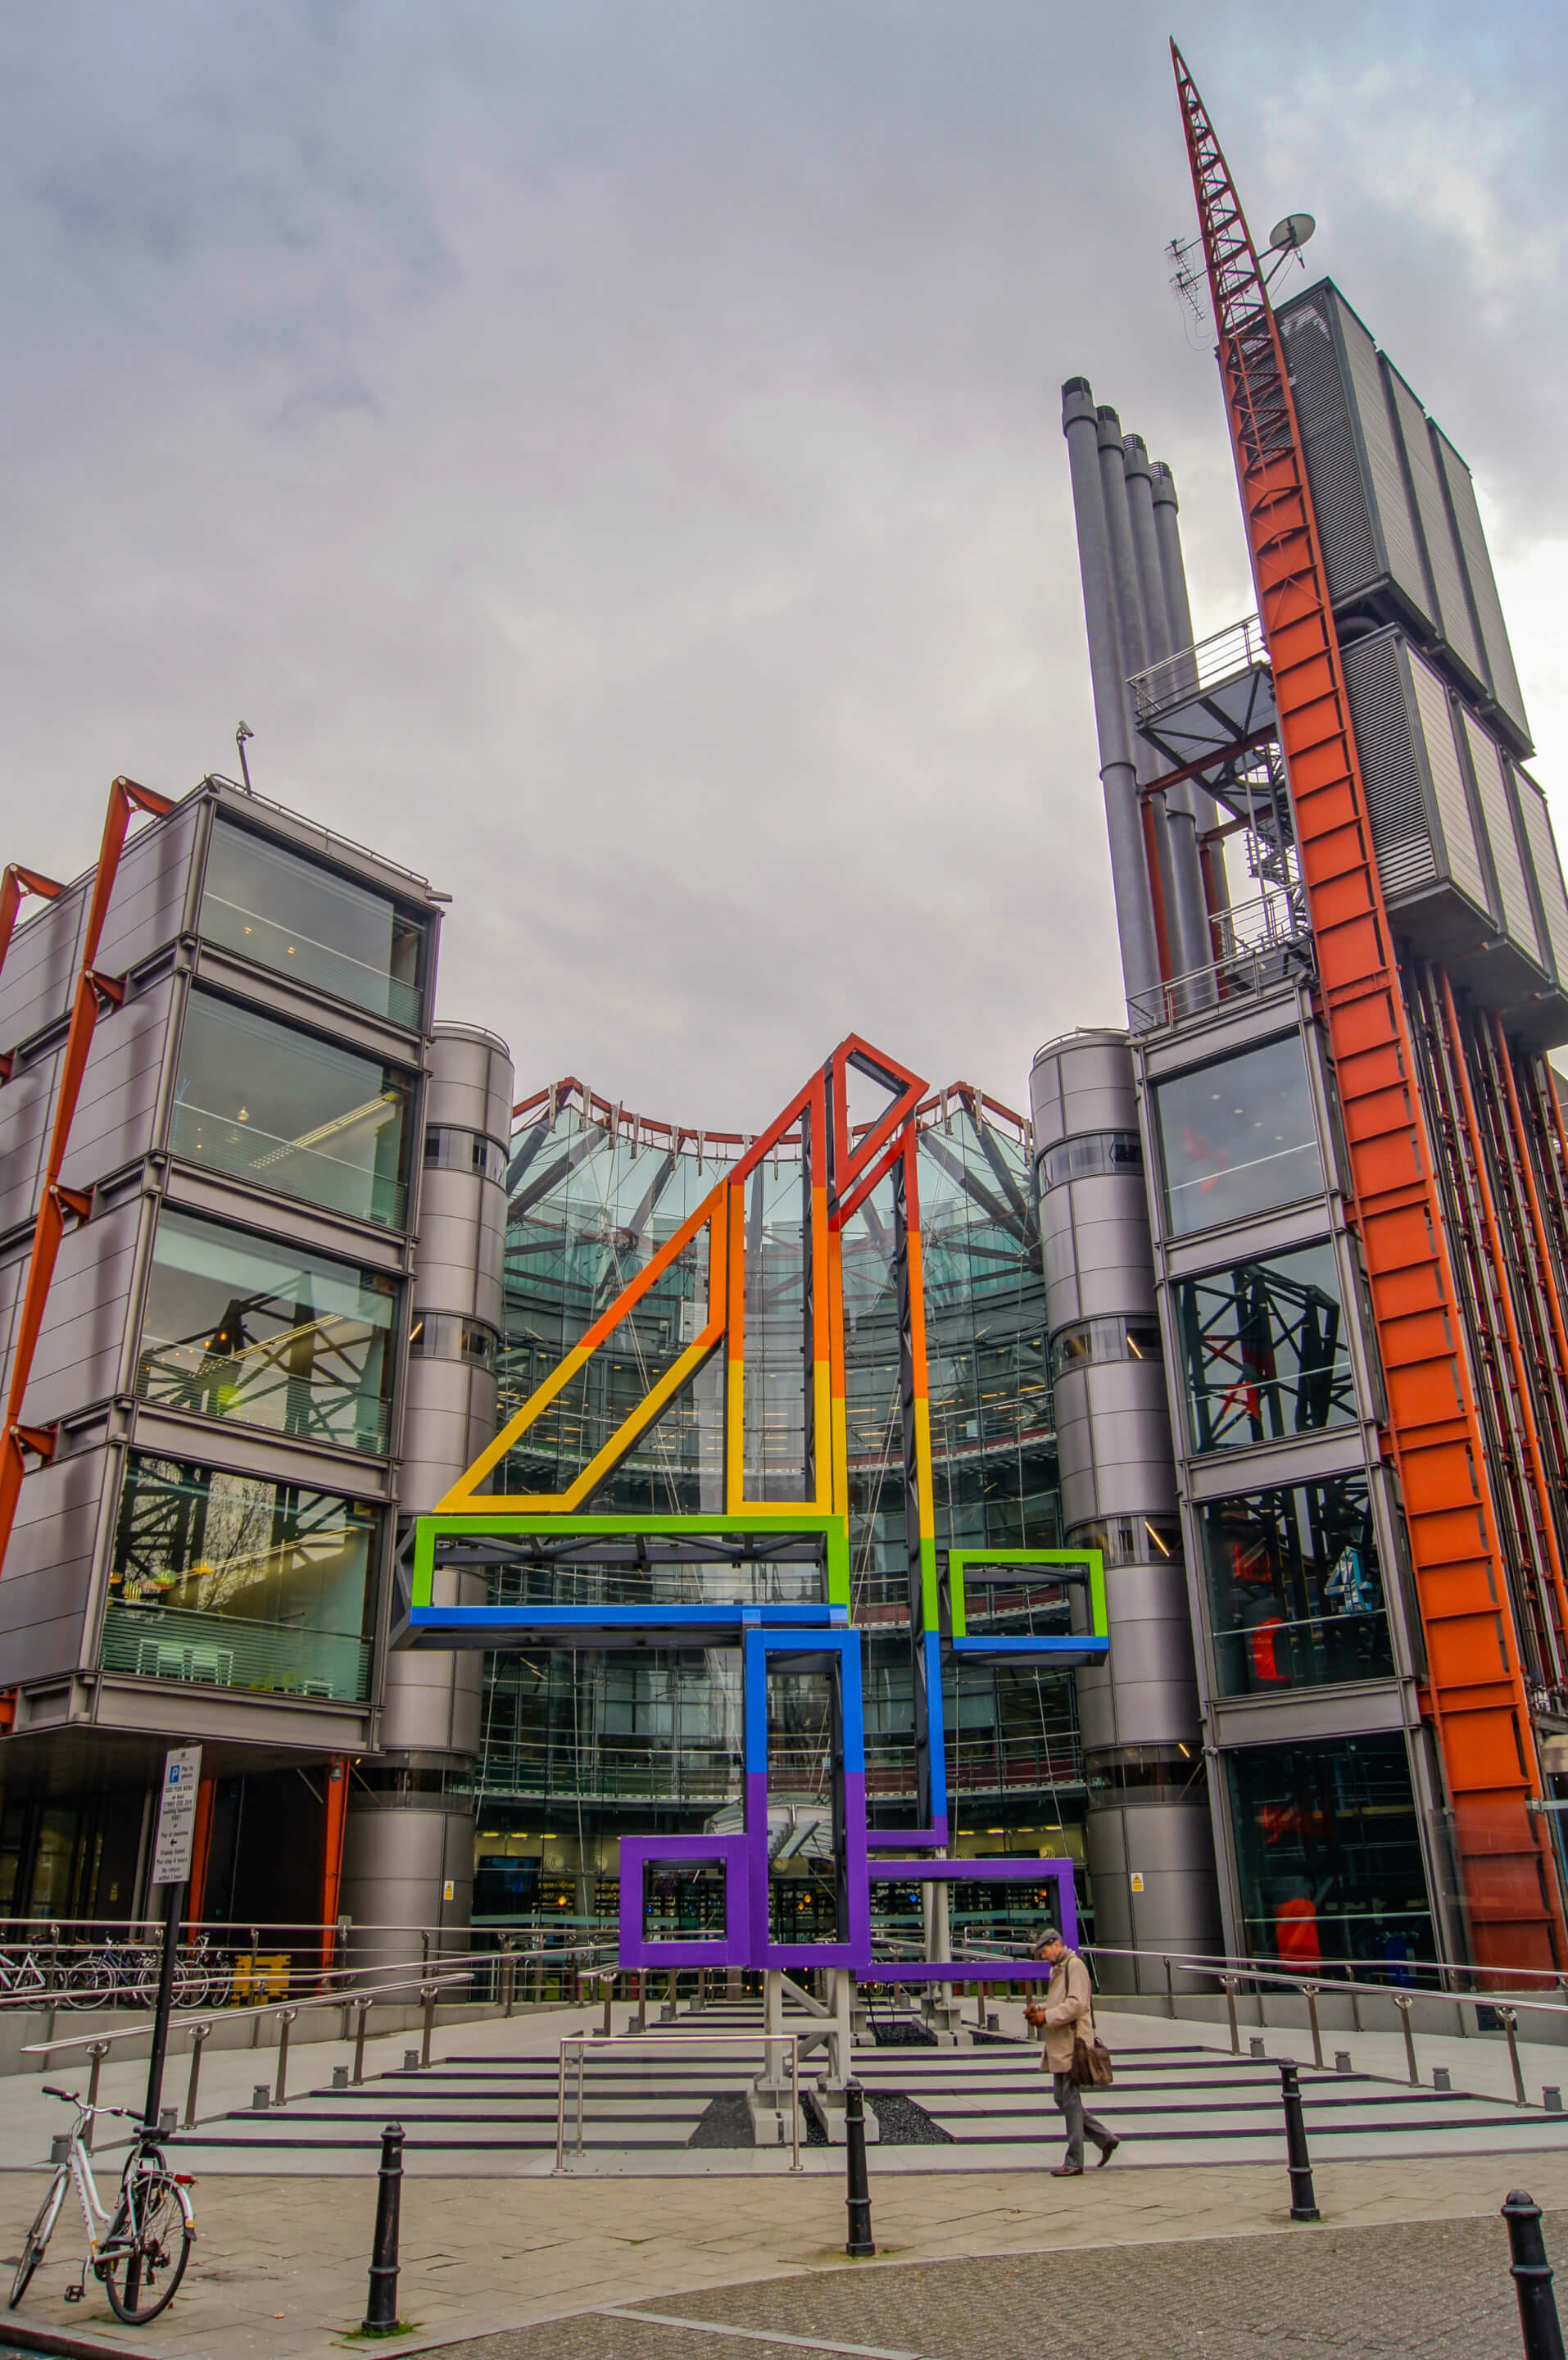 exterior of a broadcasting building in london with a giant rainbow "4"